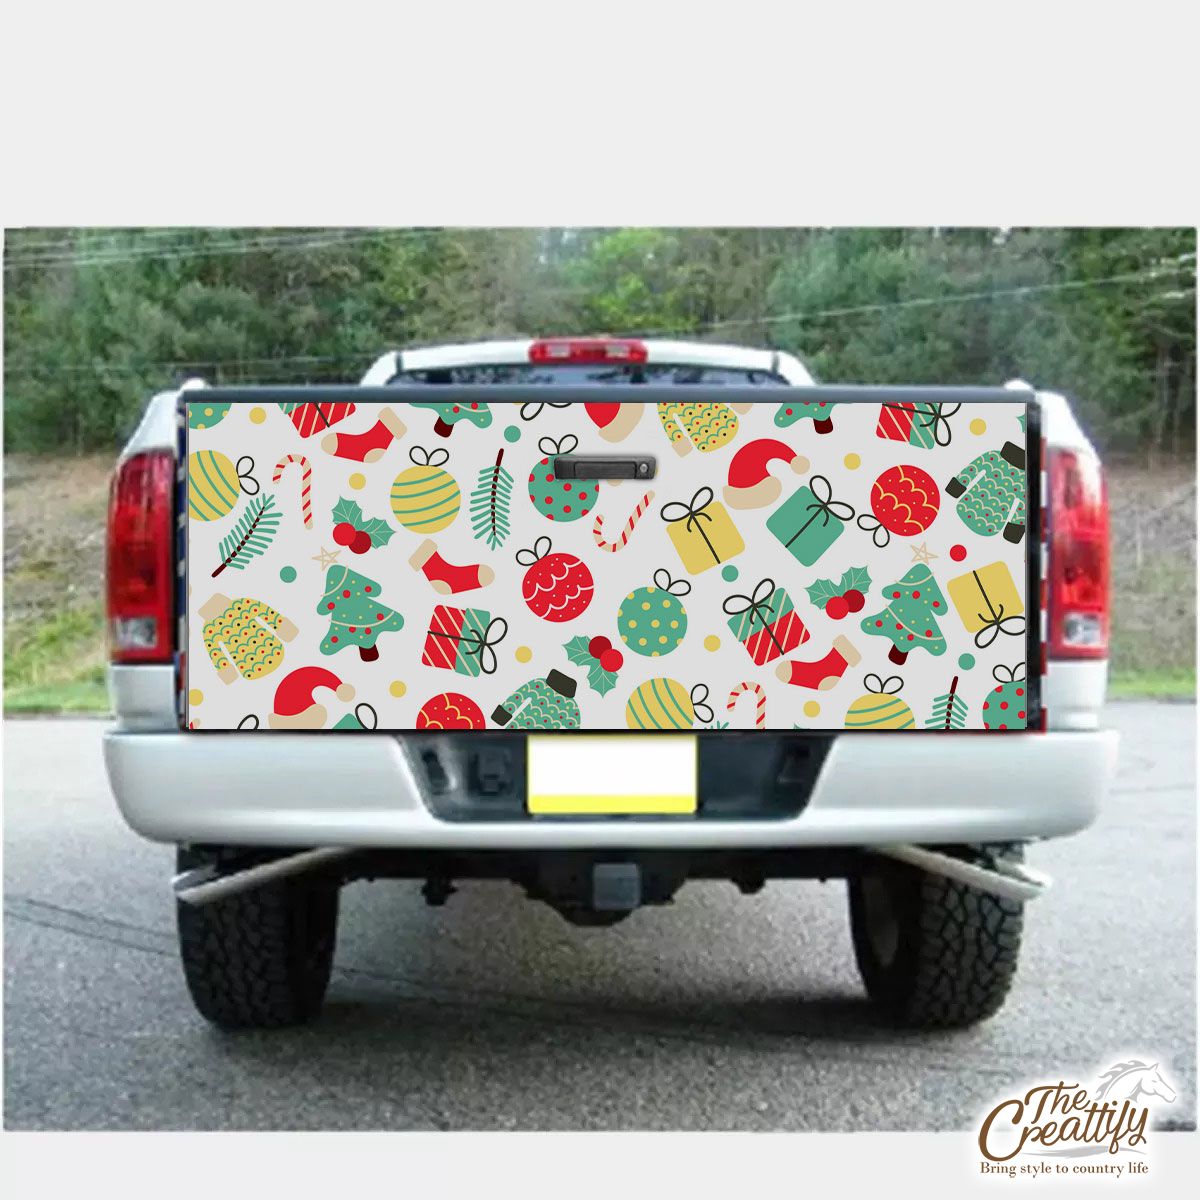 Christmas Gifts, Balls, Santa Hat, Red Socks, Candy Canes, Pattern Truck Bed Decal